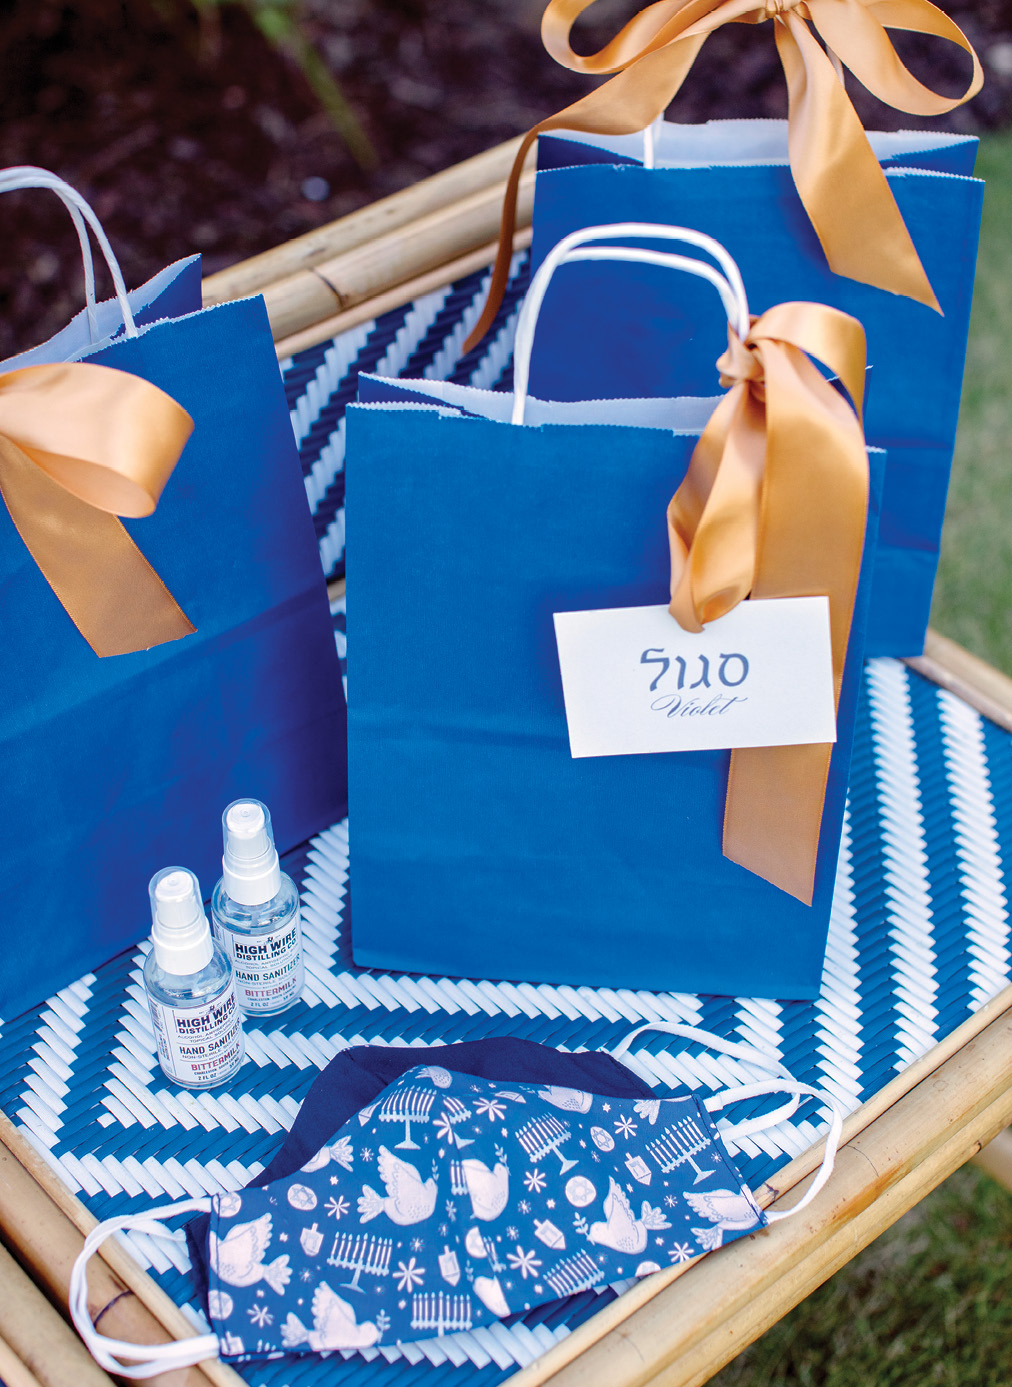 Hanukkah’s blue and white palette is accented by silver, as well as gold, in the welcome bags, which offer local Bittermilk hand sanitizer and festive masks